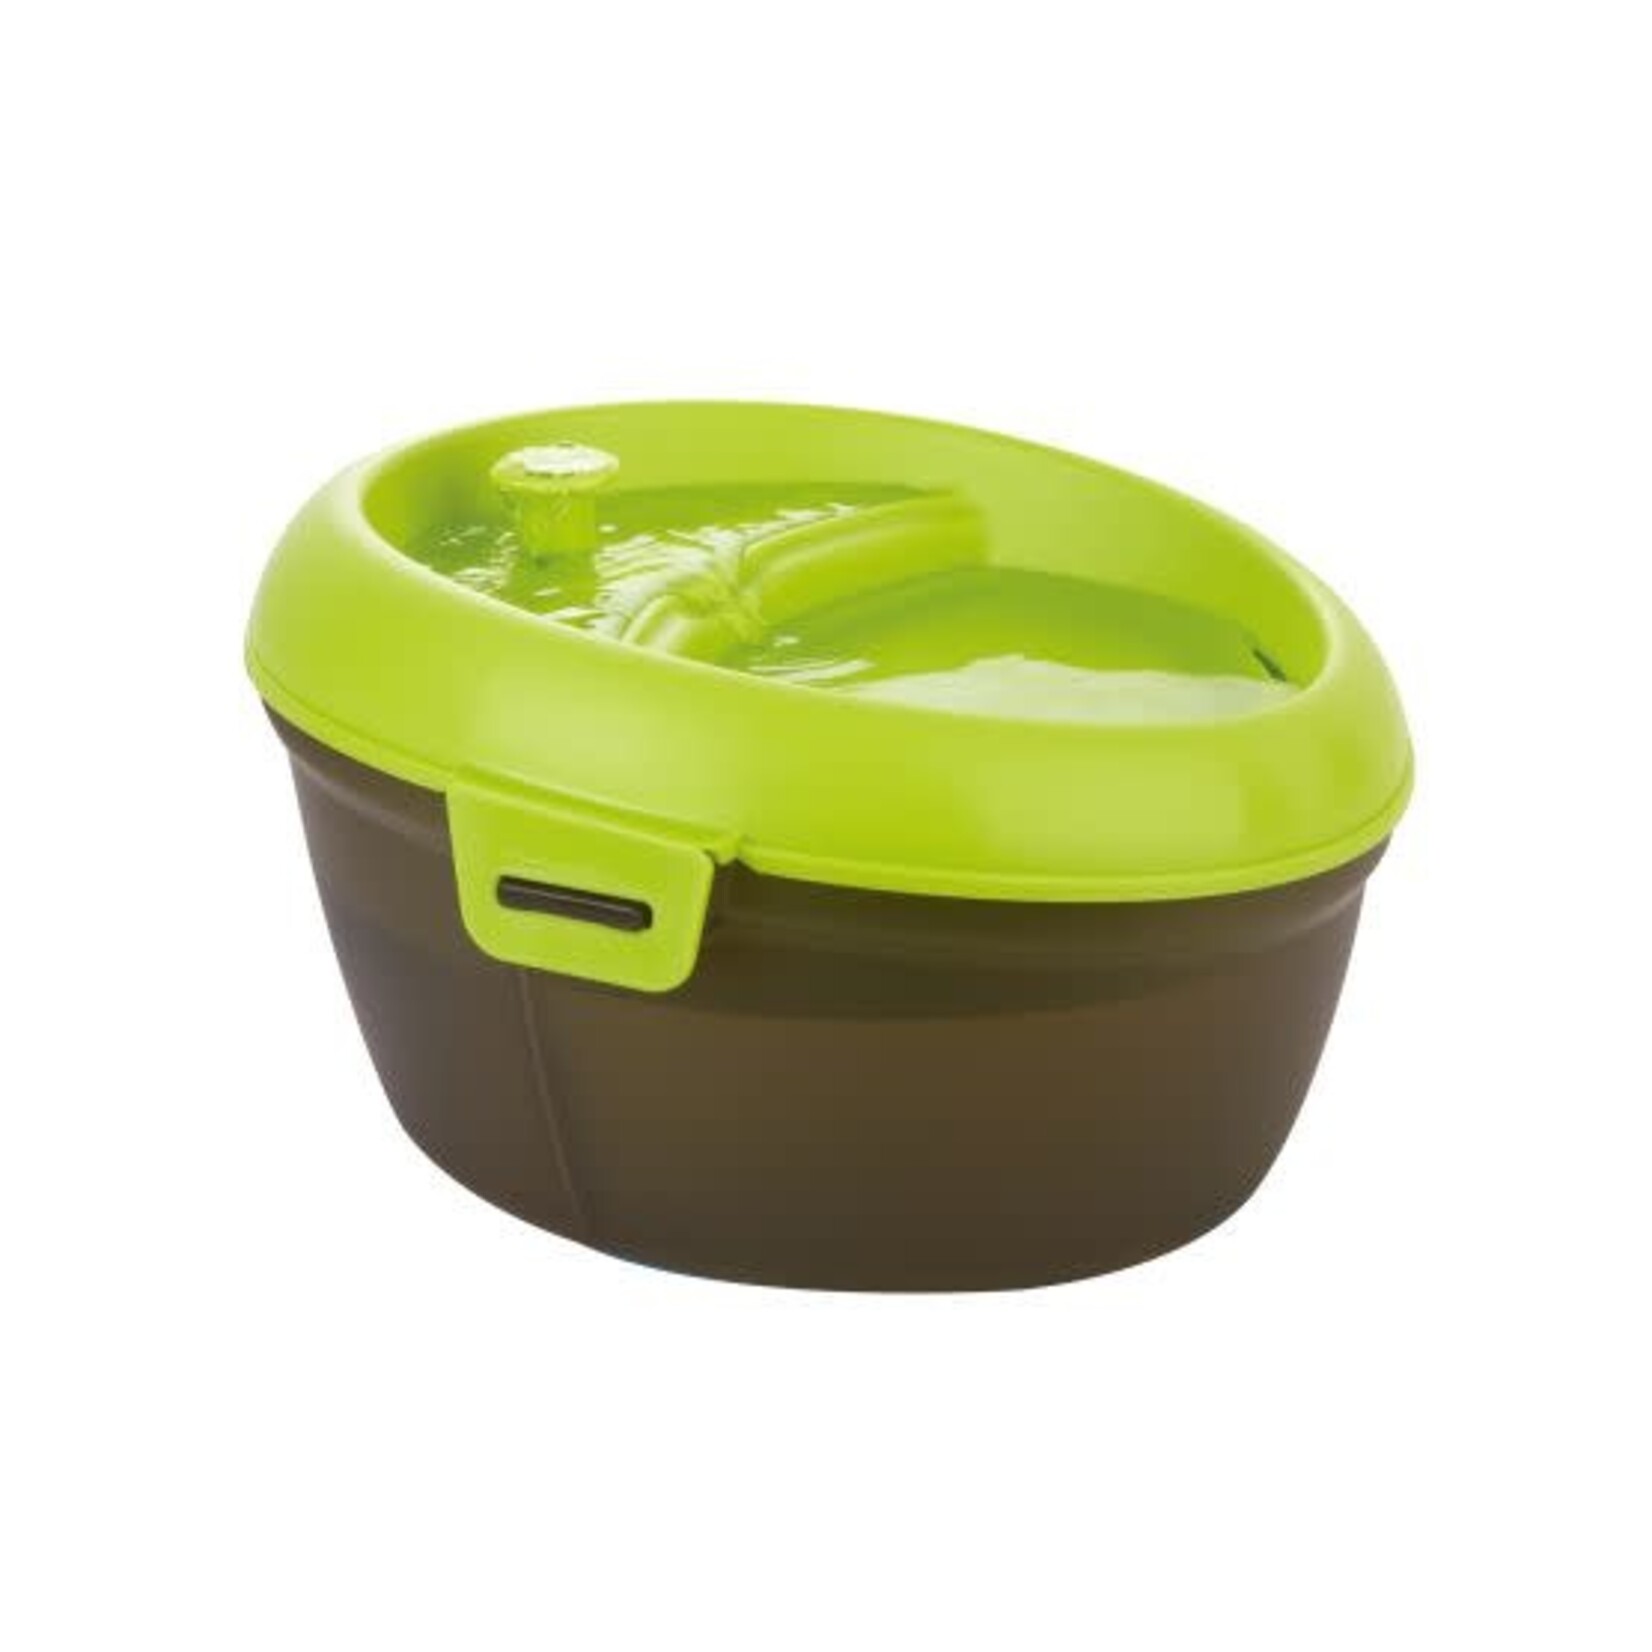 H2O FONTAINE CHIEN VERTE 6 LITRES